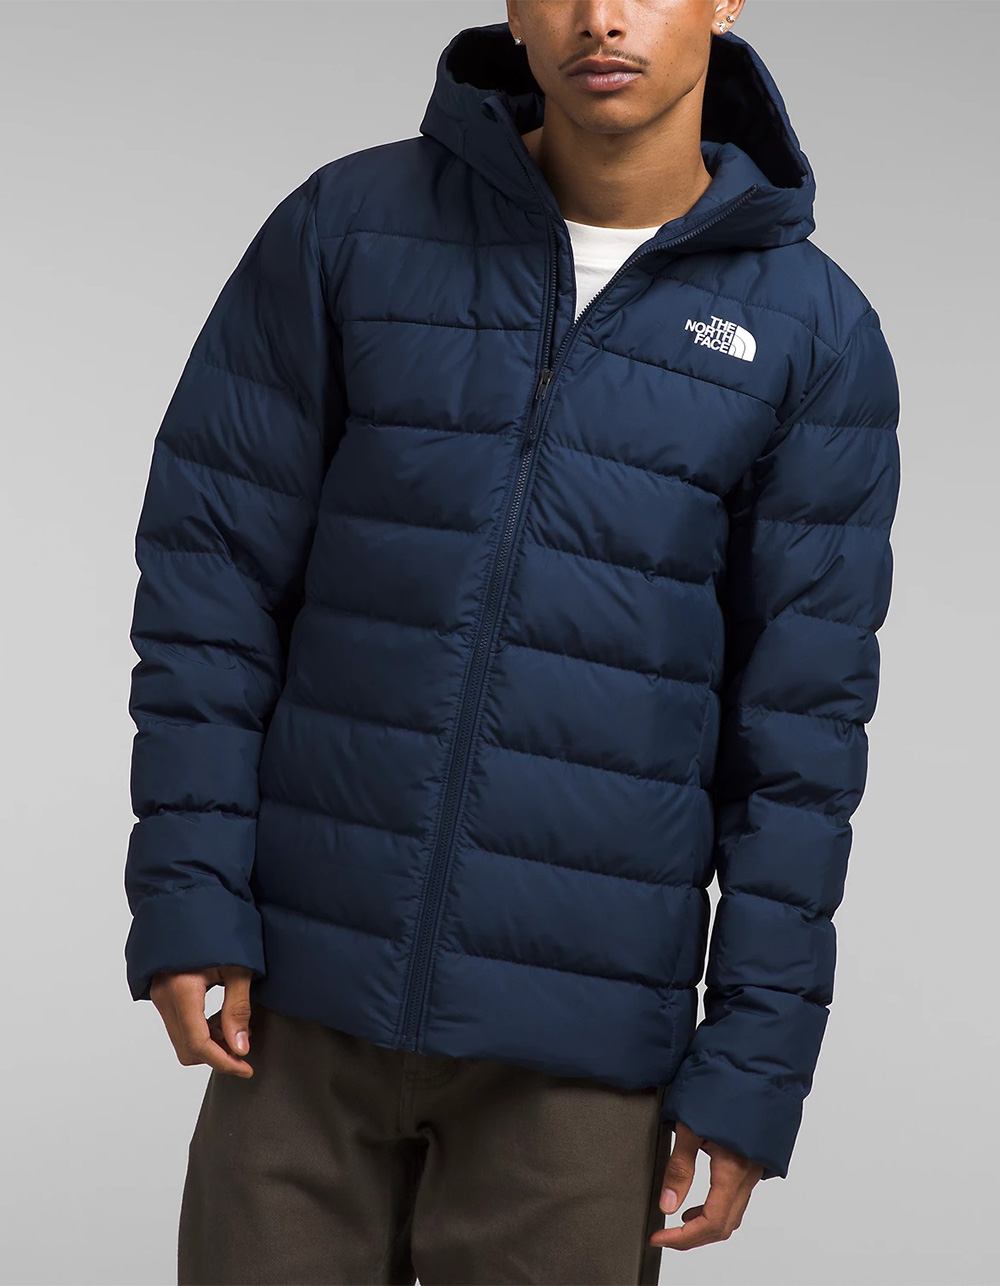 THE NORTH FACE Aconcagua 3 Mens Hooded Puffer Jacket - NAVY | Tillys